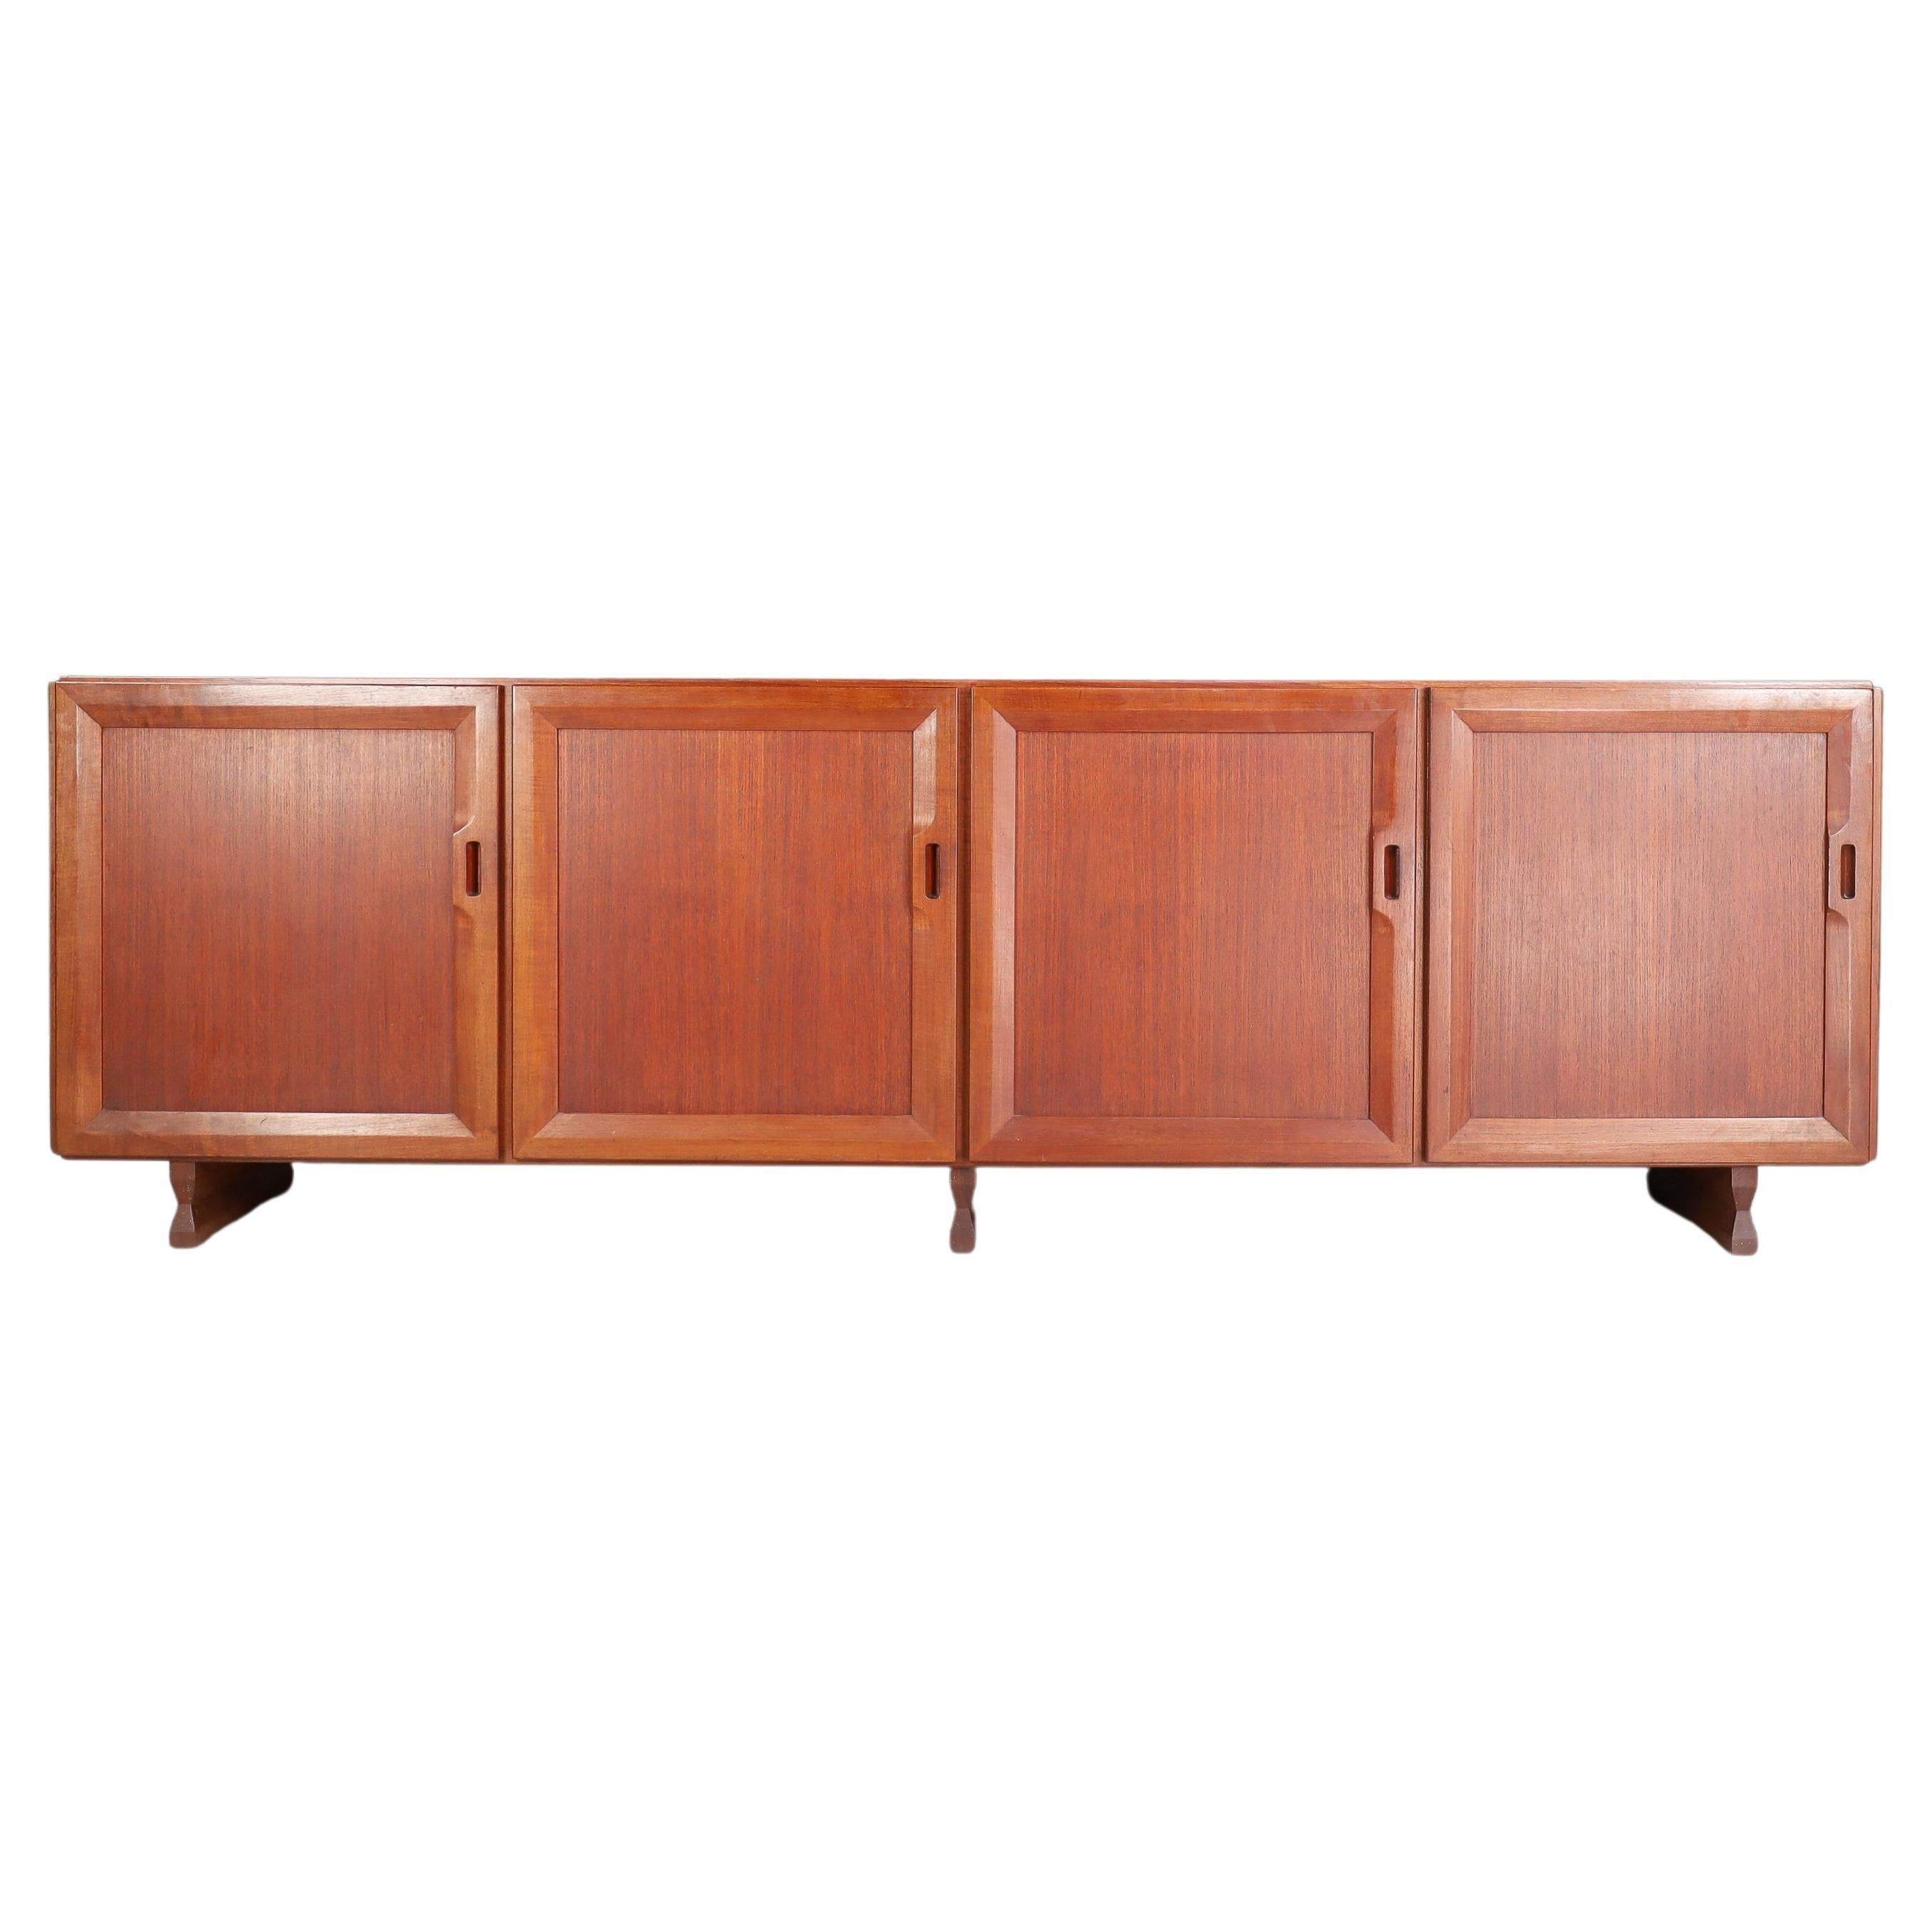 Mid-Century Modern Sideboard MB 51 by Franco Albini for Poggi, Italy, the 1950s 